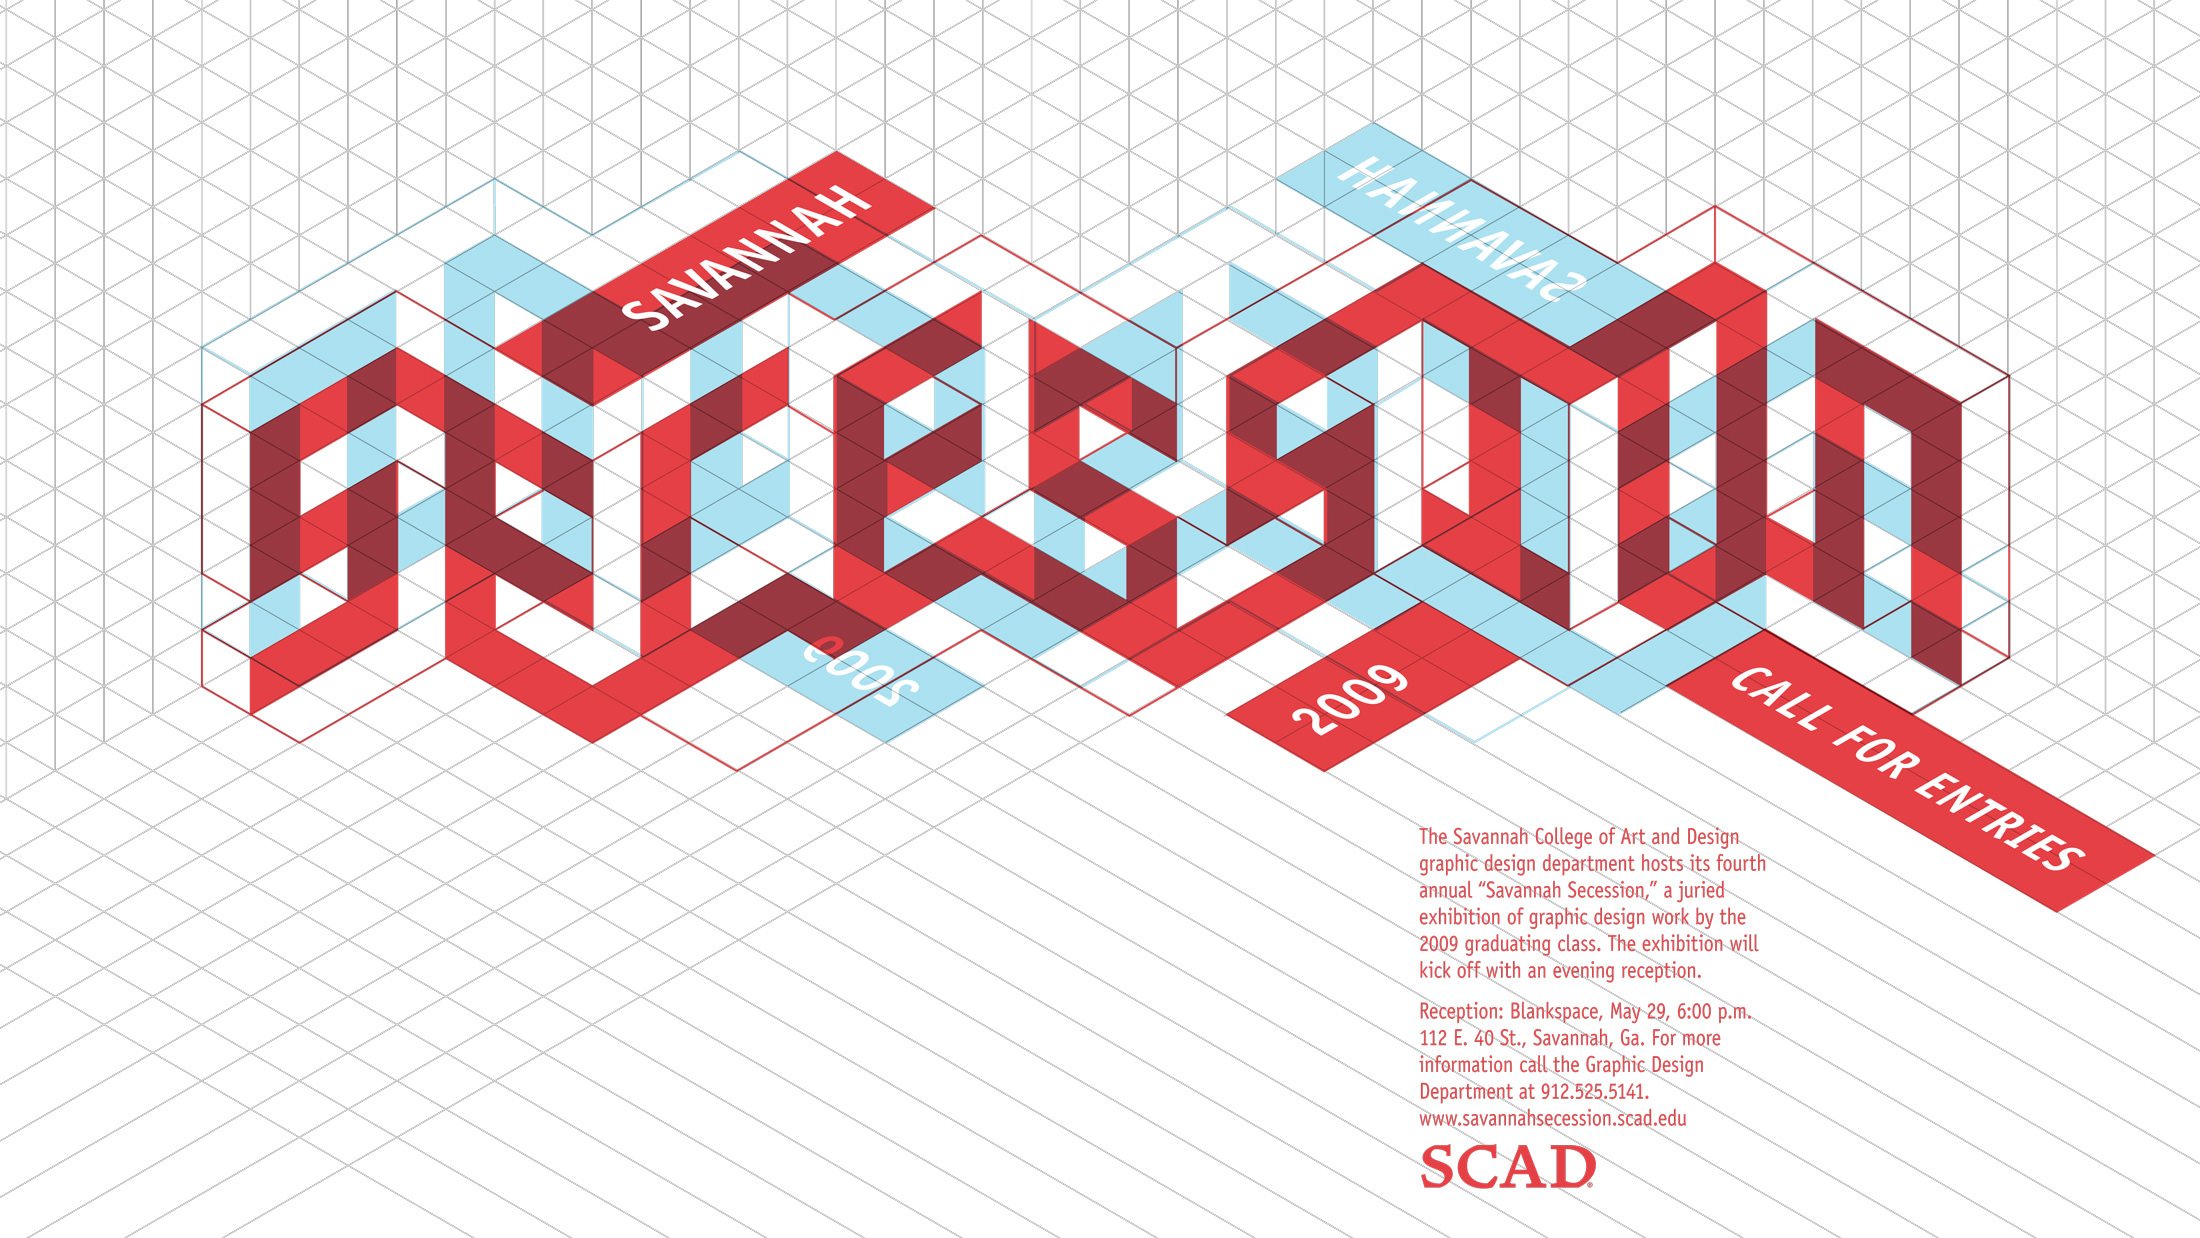 The Savannah Secession Call for Entries Poster.